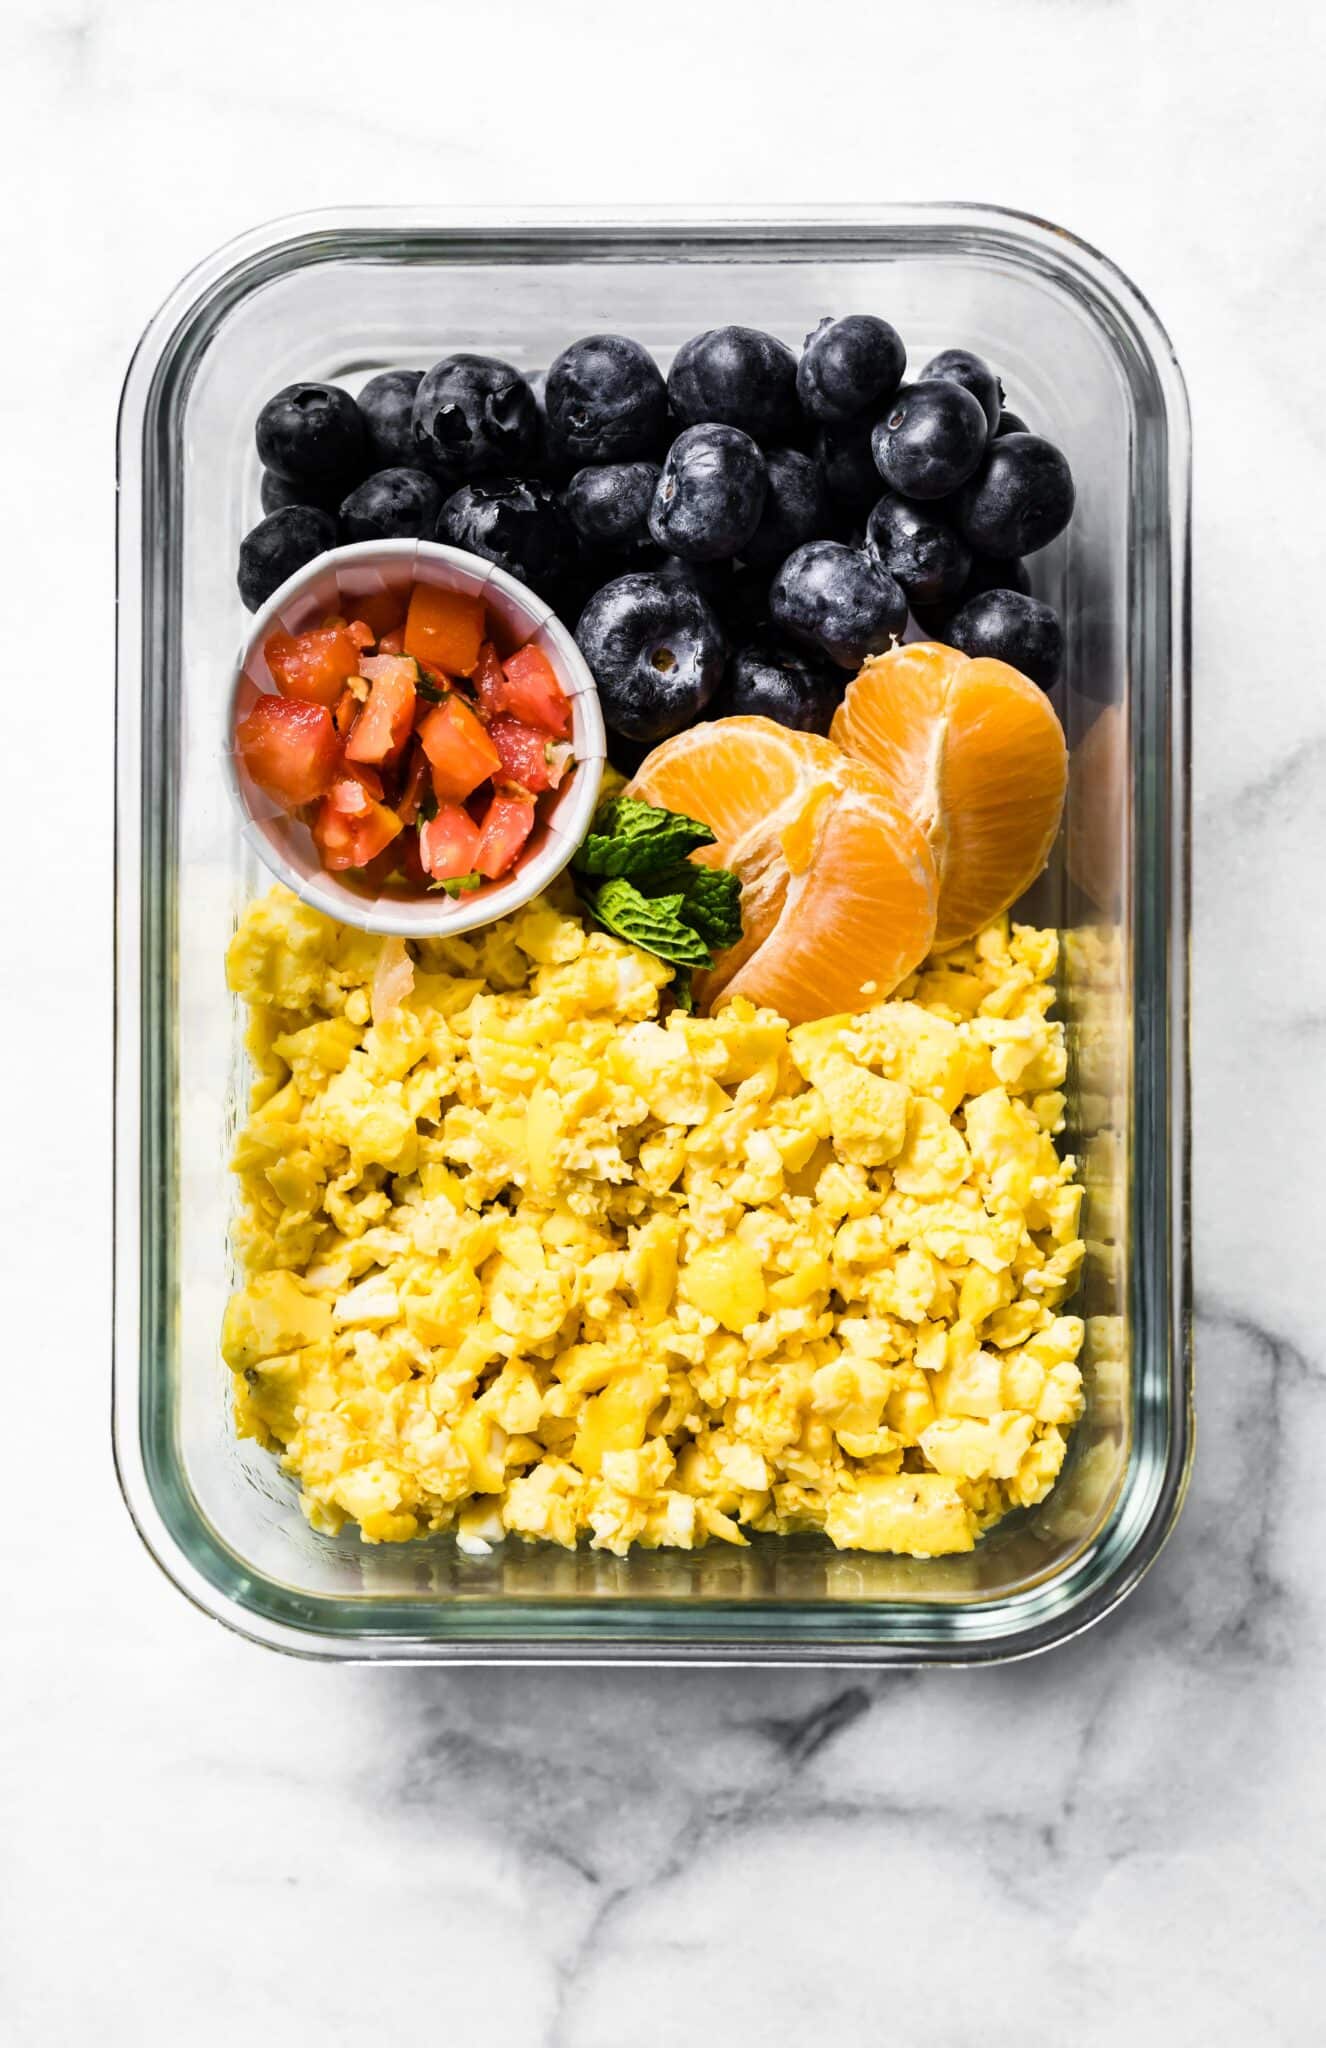 Oven baked scrambled eggs in a meal prep container with oranges, salsa, and blueberries.